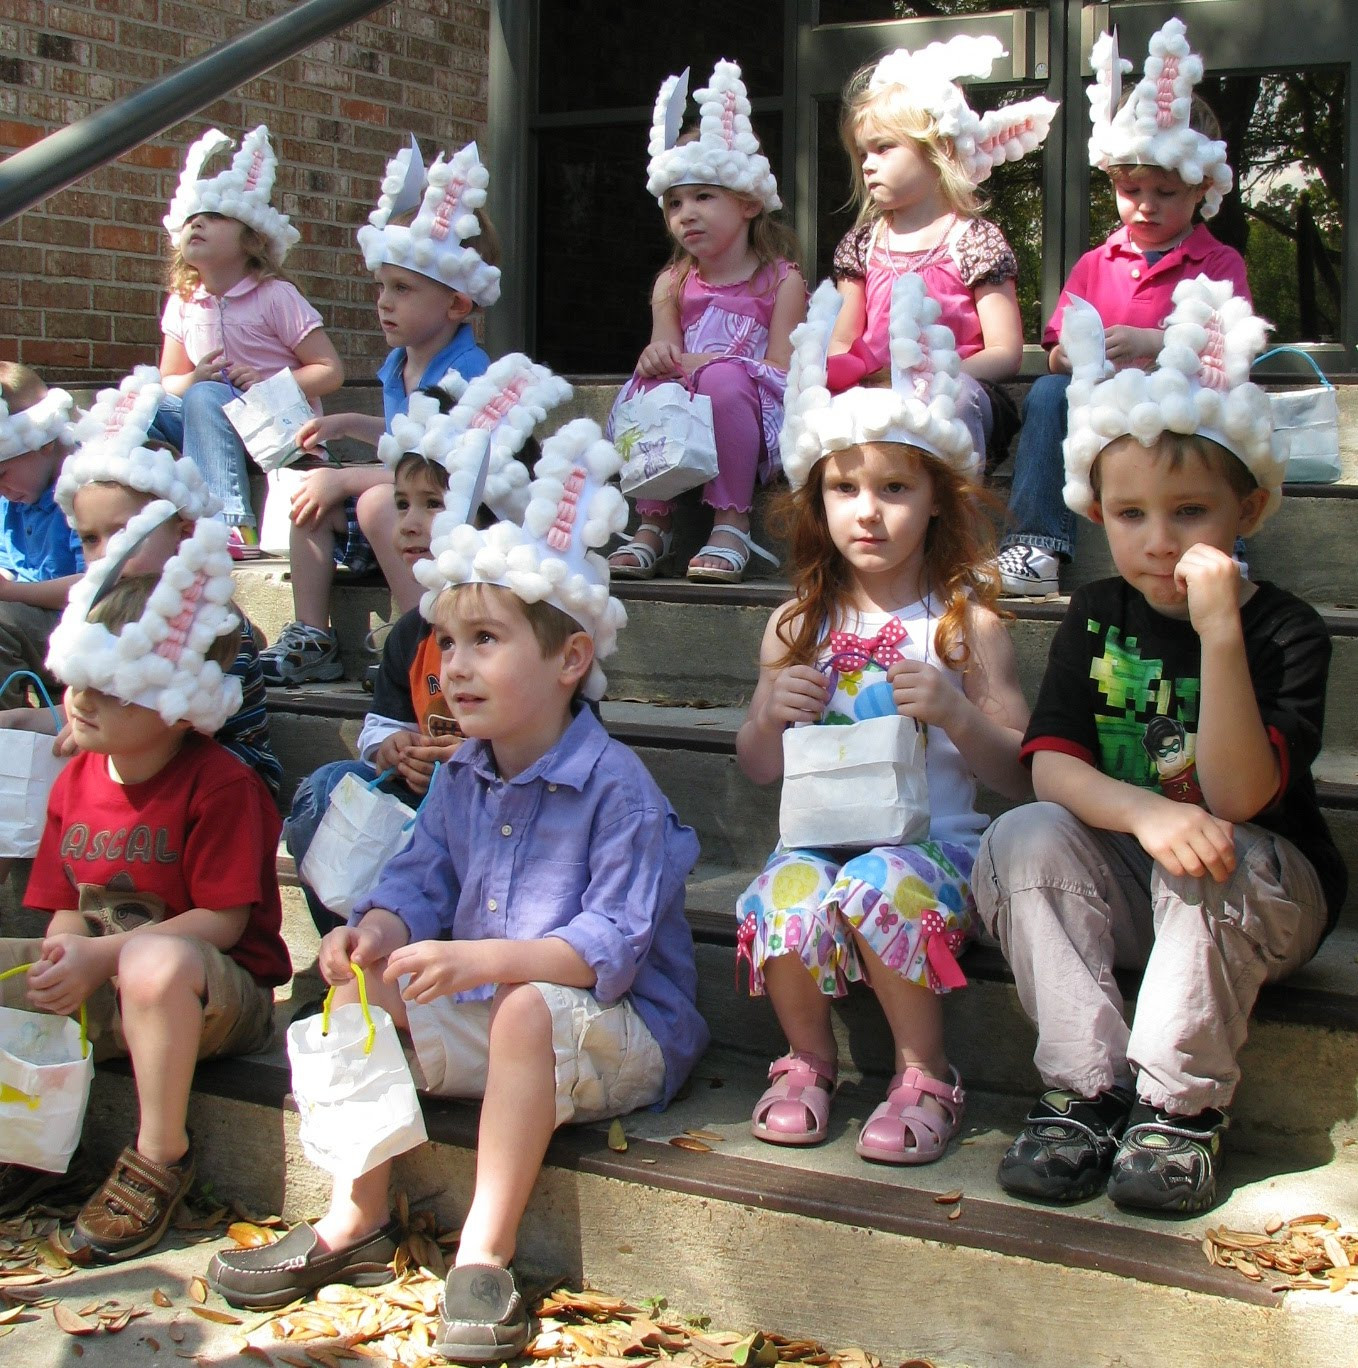 Kindergarten Easter Party Ideas
 The Maxwell House Lily s Preschool Easter Party